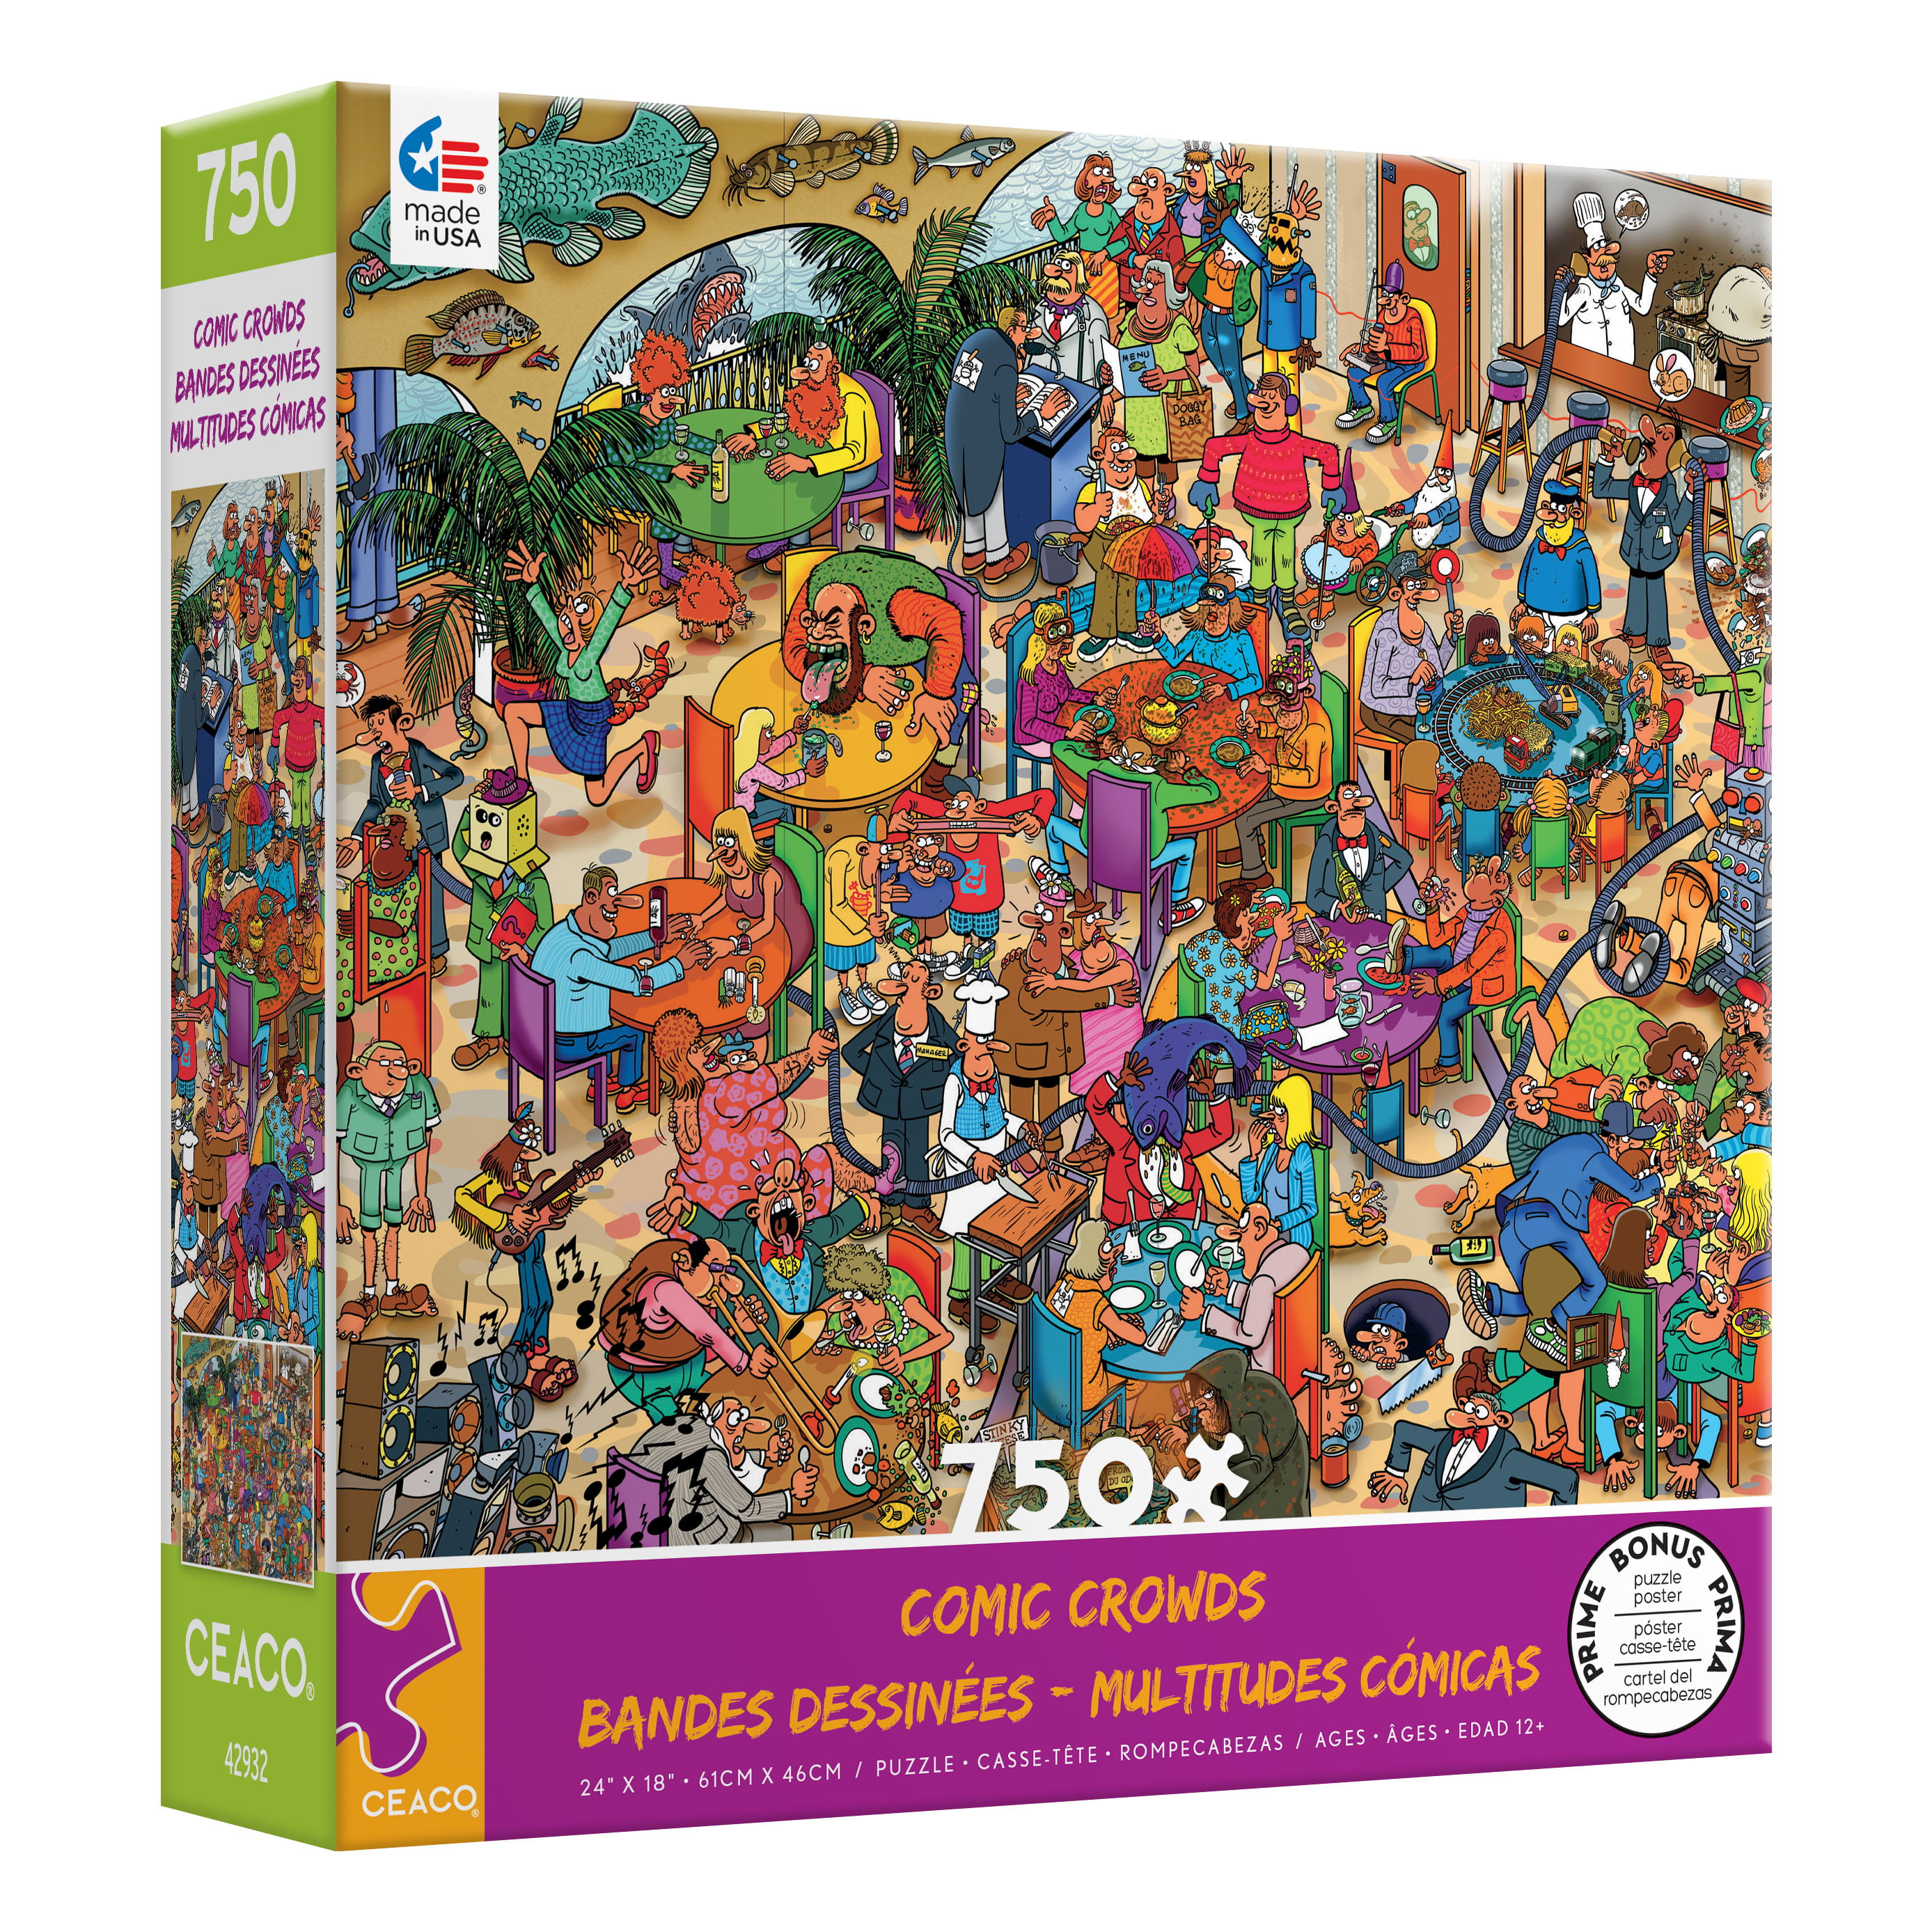 Wooden Jigsaw Puztulip-5000Outdoors Puzzle Series Artwork Gifts for Adults Teens Families